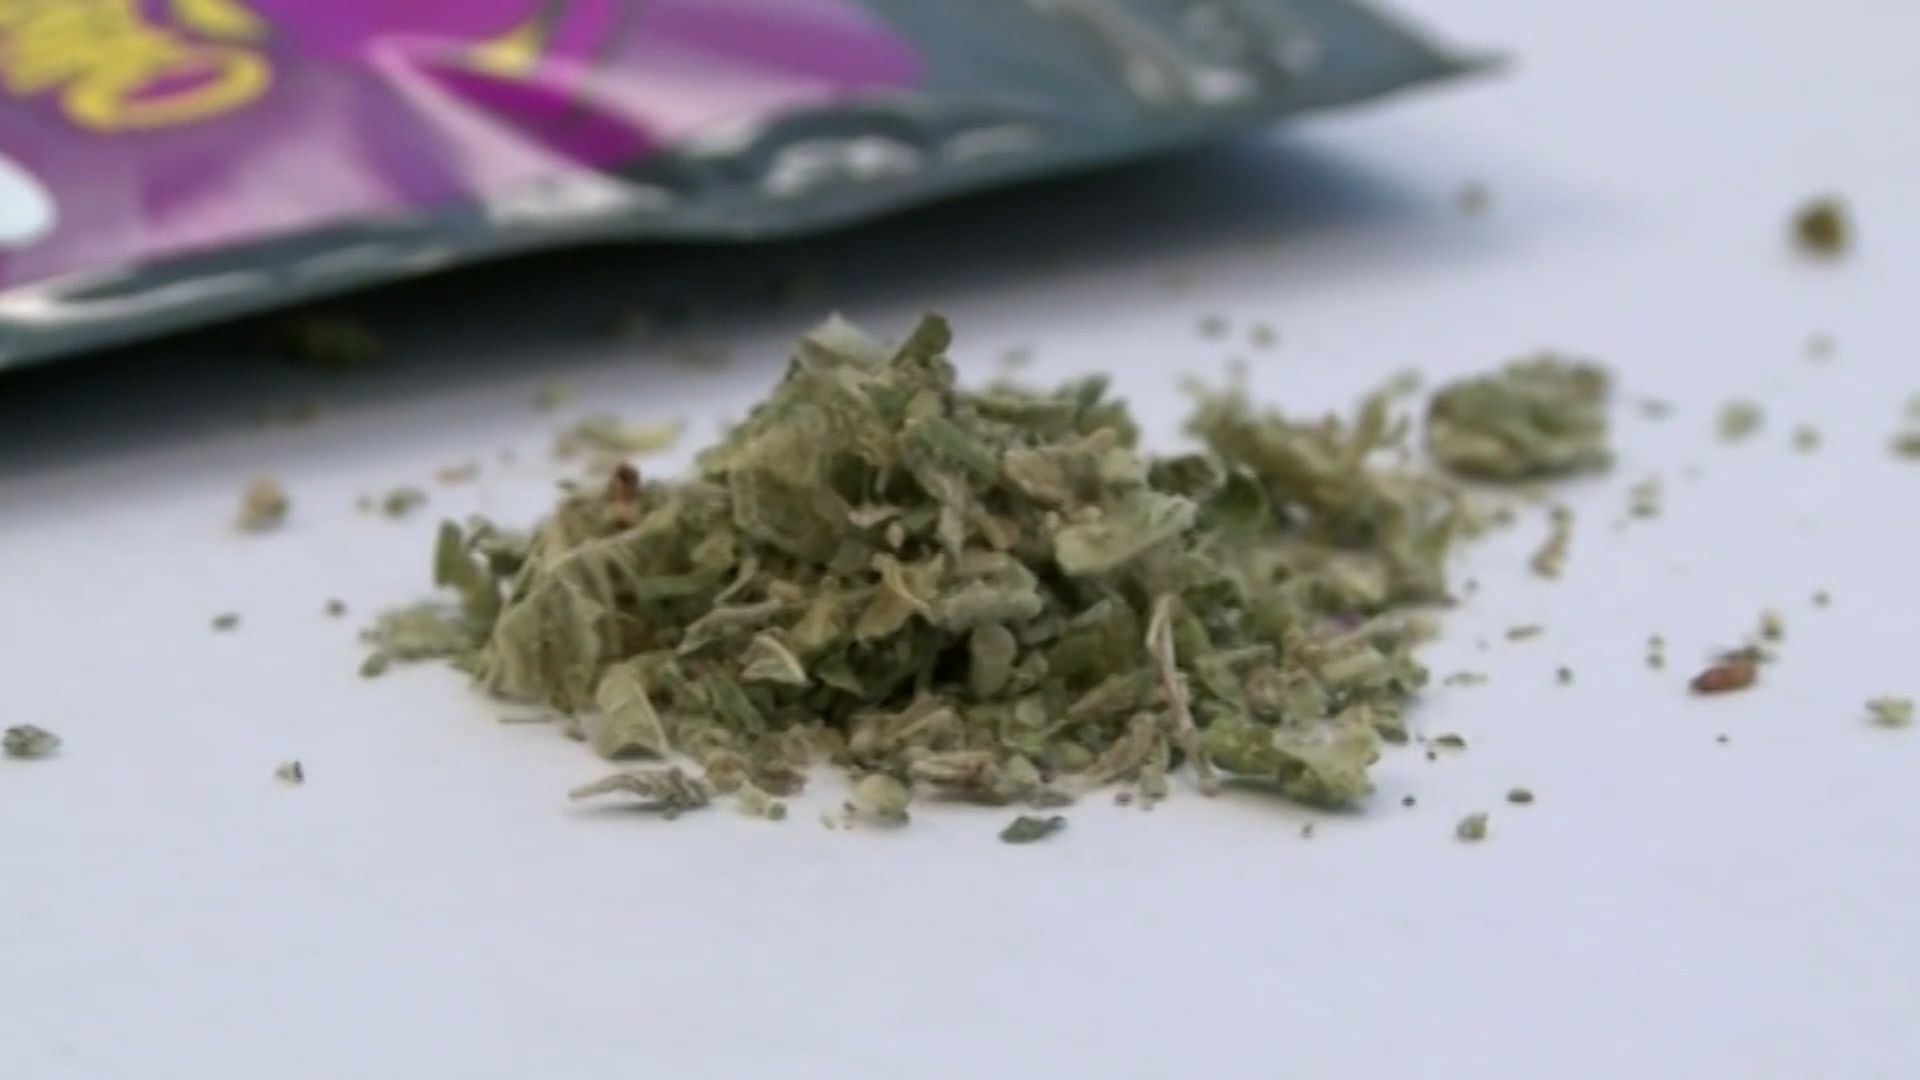 Death in Illinois tied to fake weed